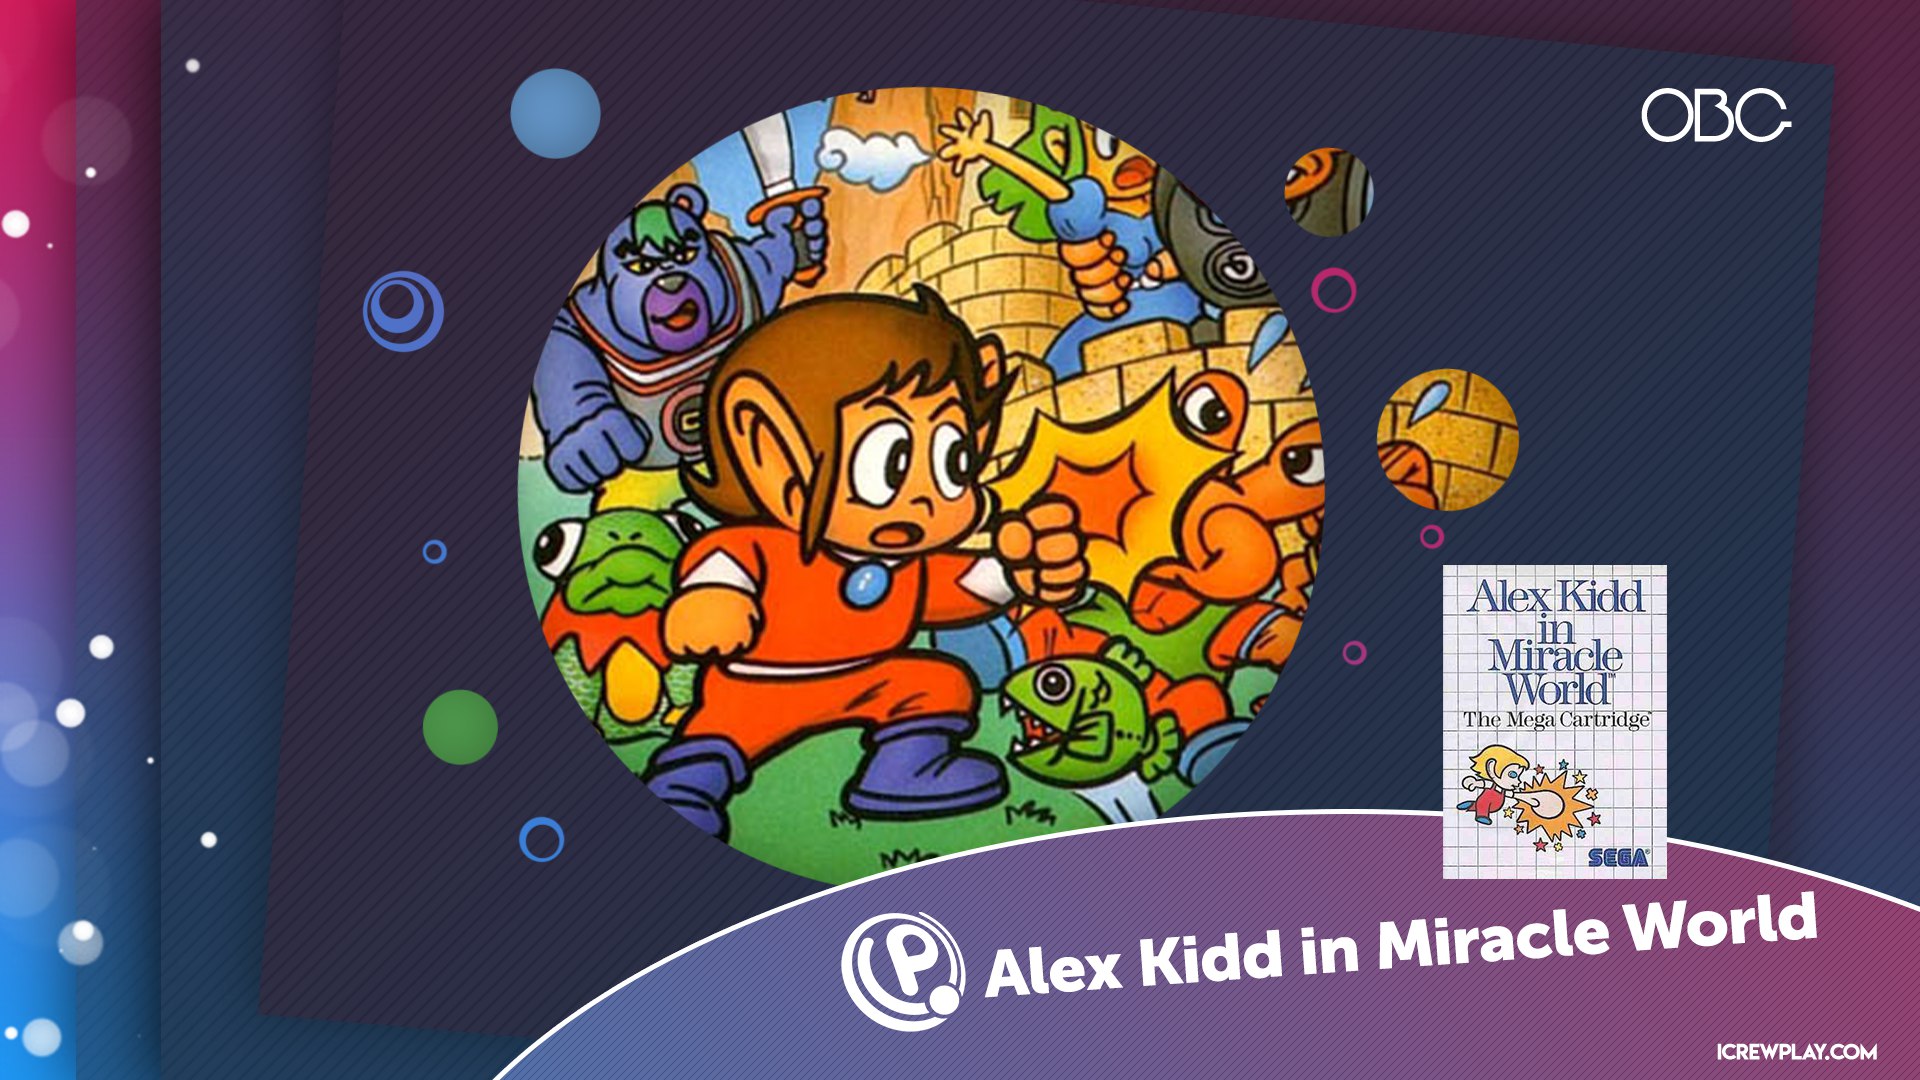 Old But Gold #67 - Alex Kidd in The Miracle World 4